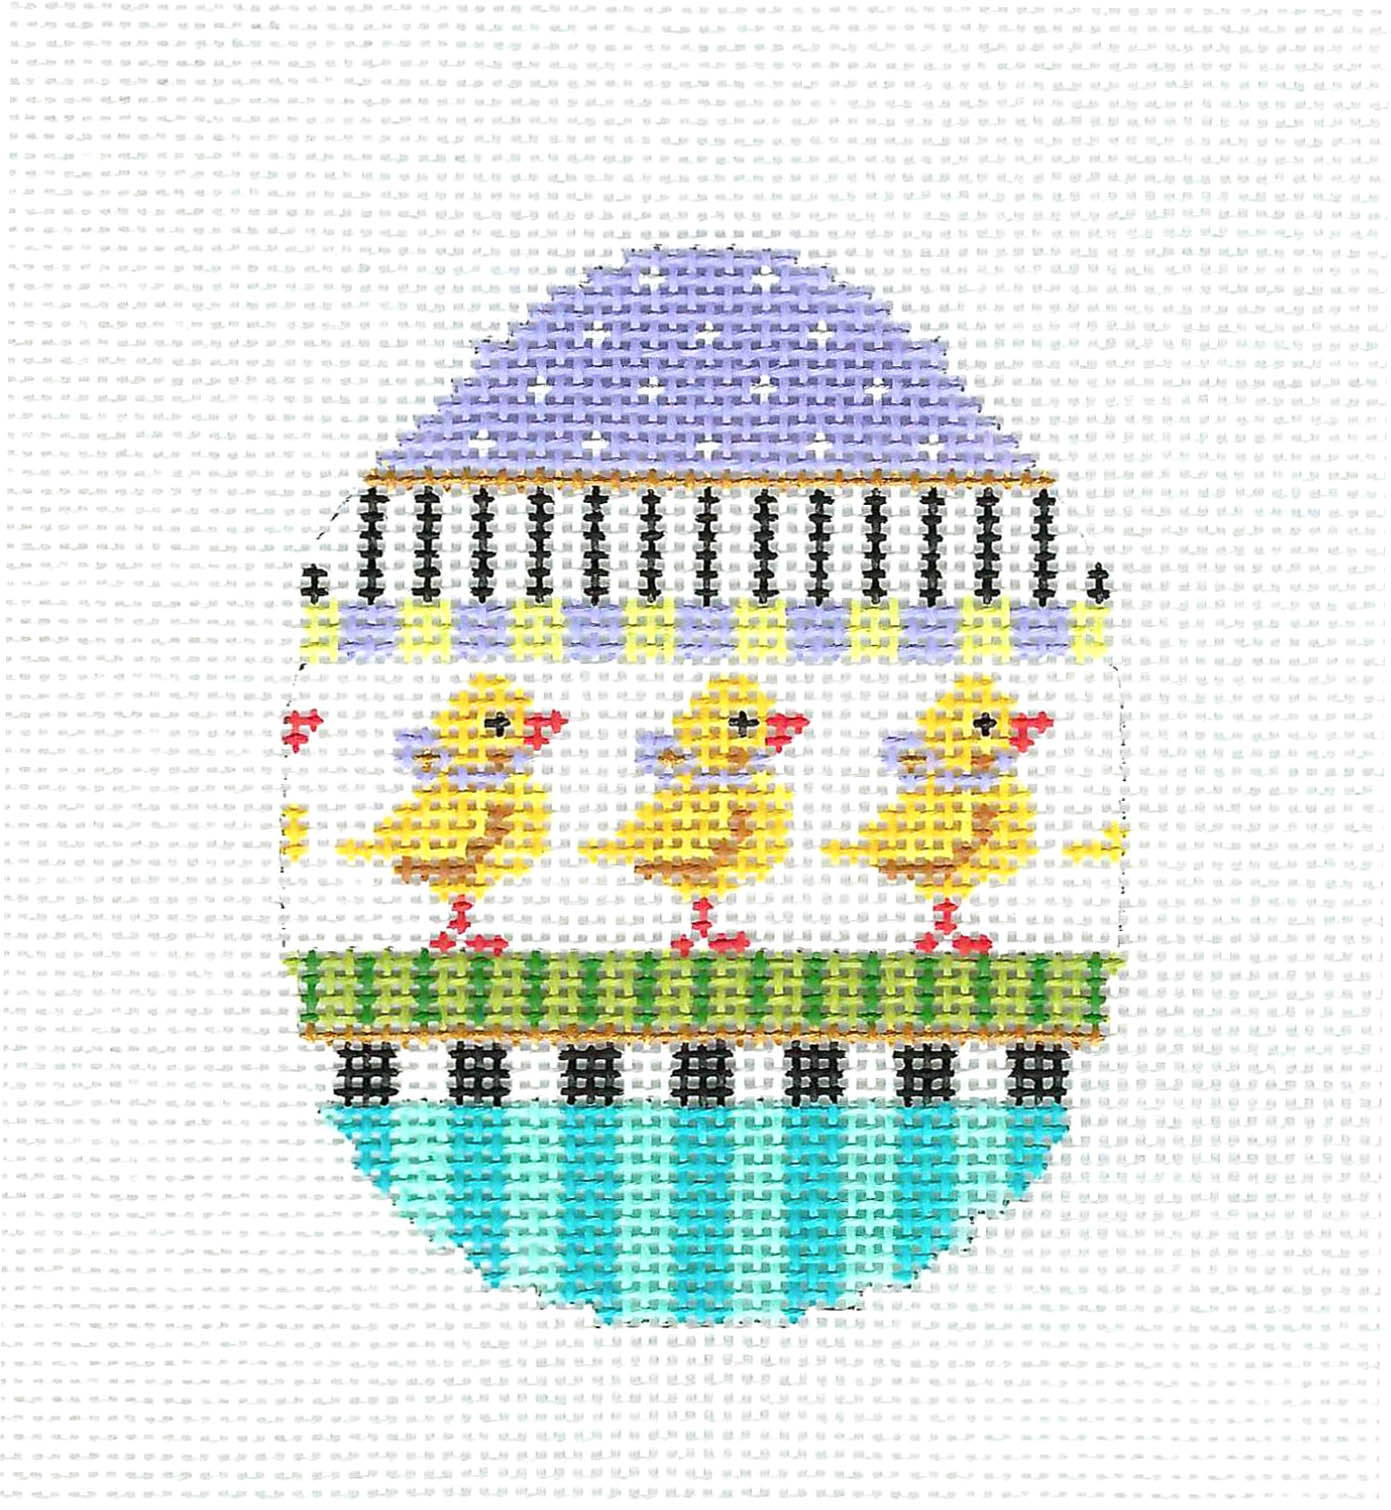 Kelly Clark ~ Parade of Yellow Chicks Easter Egg handpainted Needlepoint Ornament by Kelly Clark